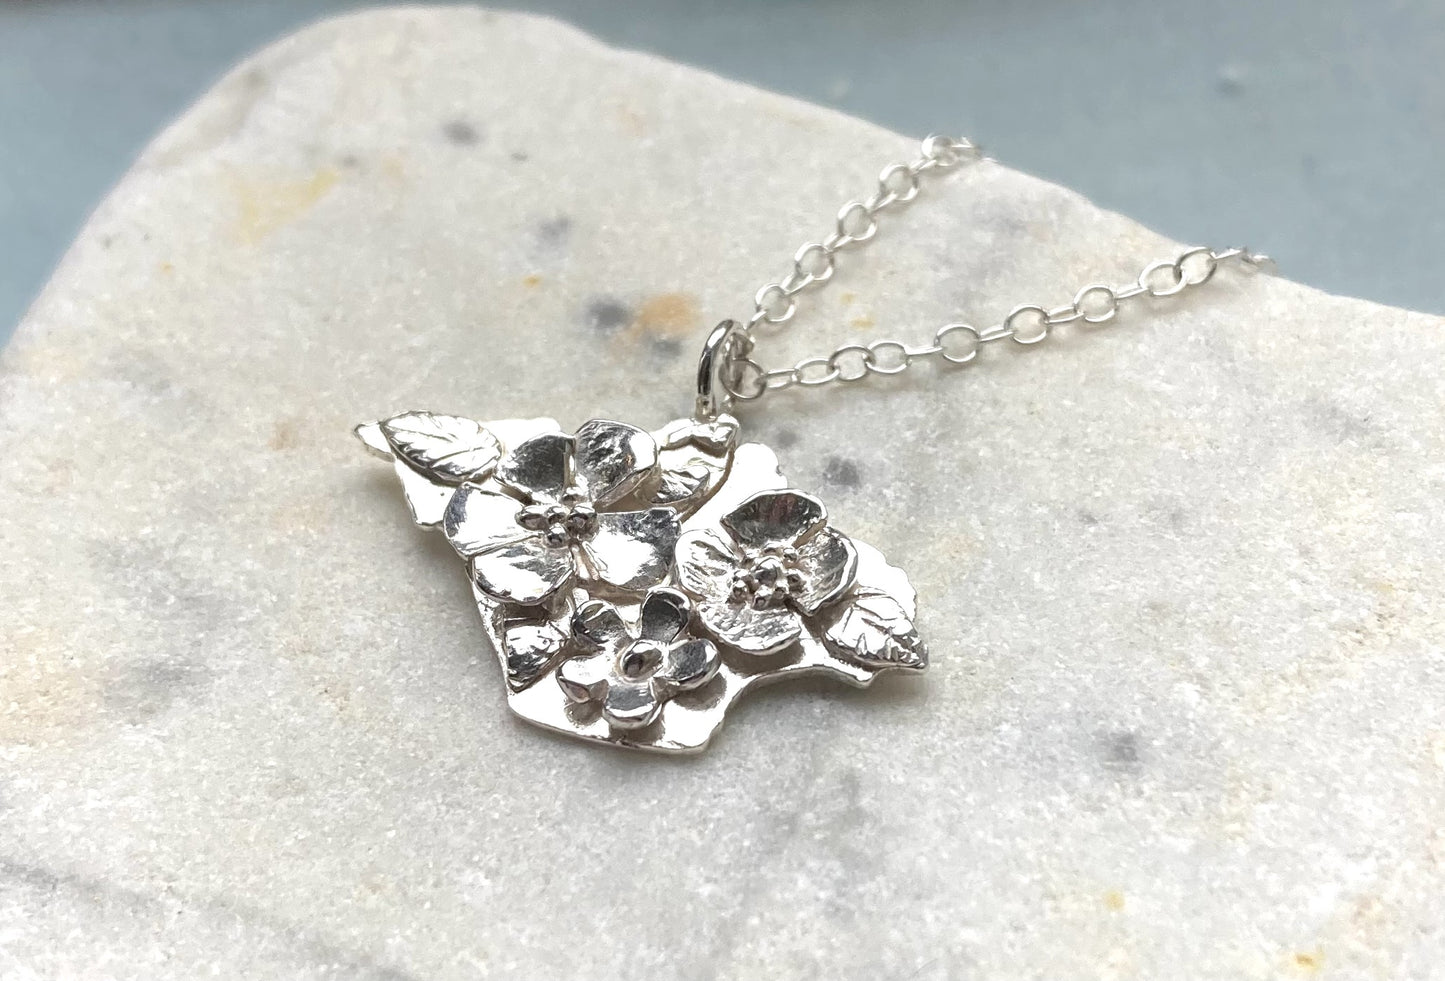 Always in Bloom - Large Floral Isle of Wight Silhouette Pendant